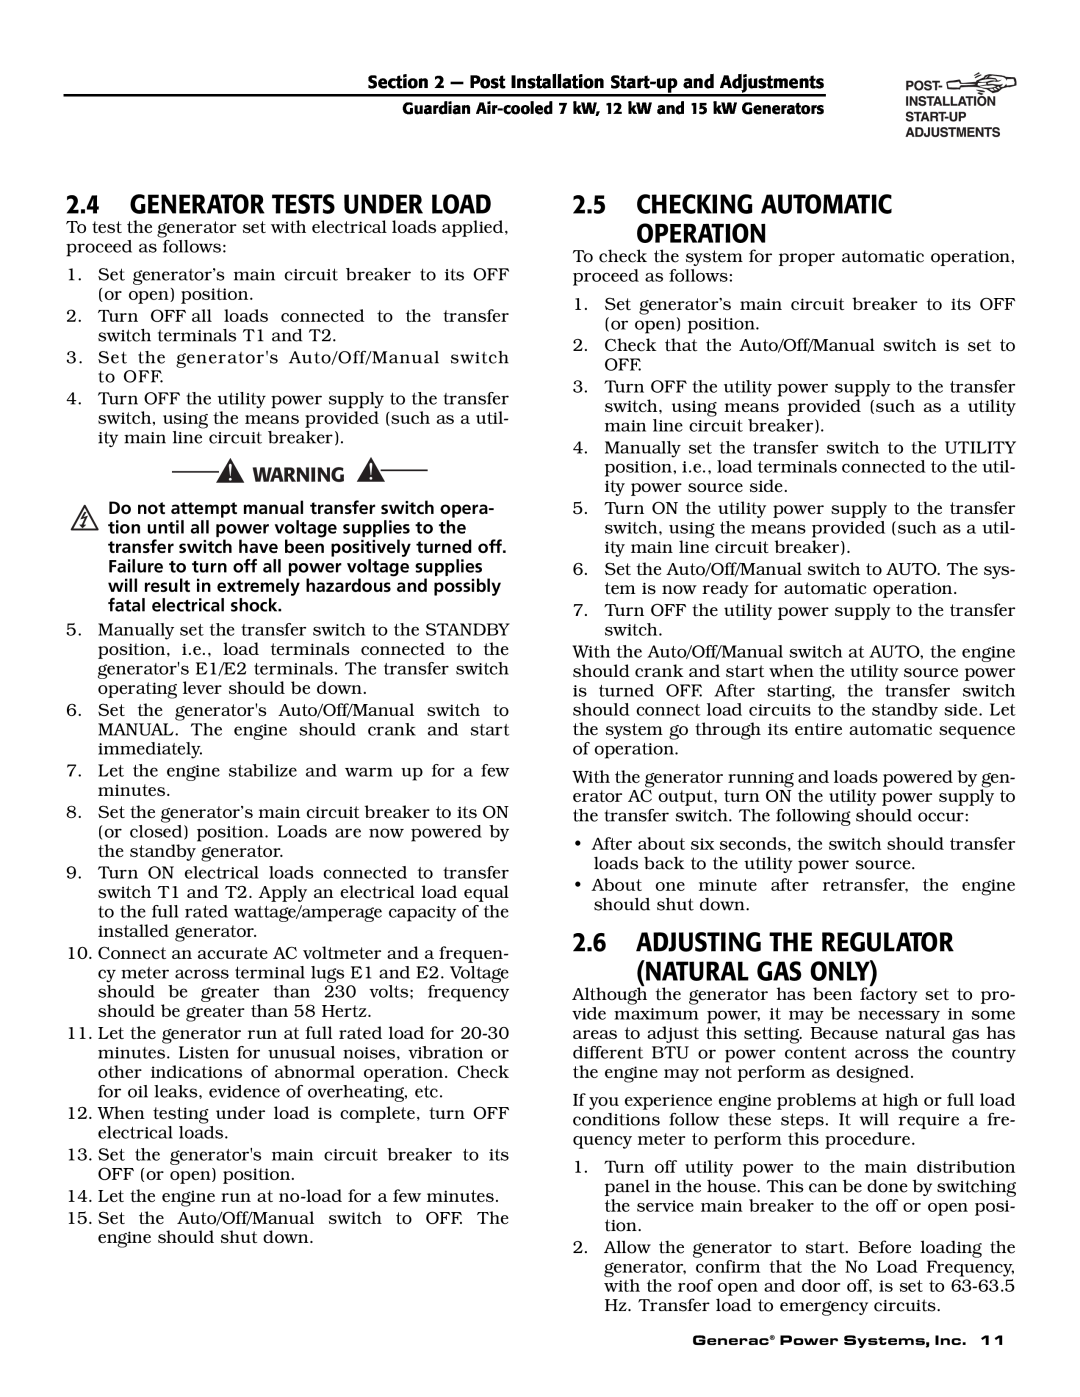 Generac 04389-1, 04456-1, 04390-1 owner manual 2.4GENERATOR TESTS UNDER LOAD, 2.5CHECKING AUTOMATIC OPERATION 